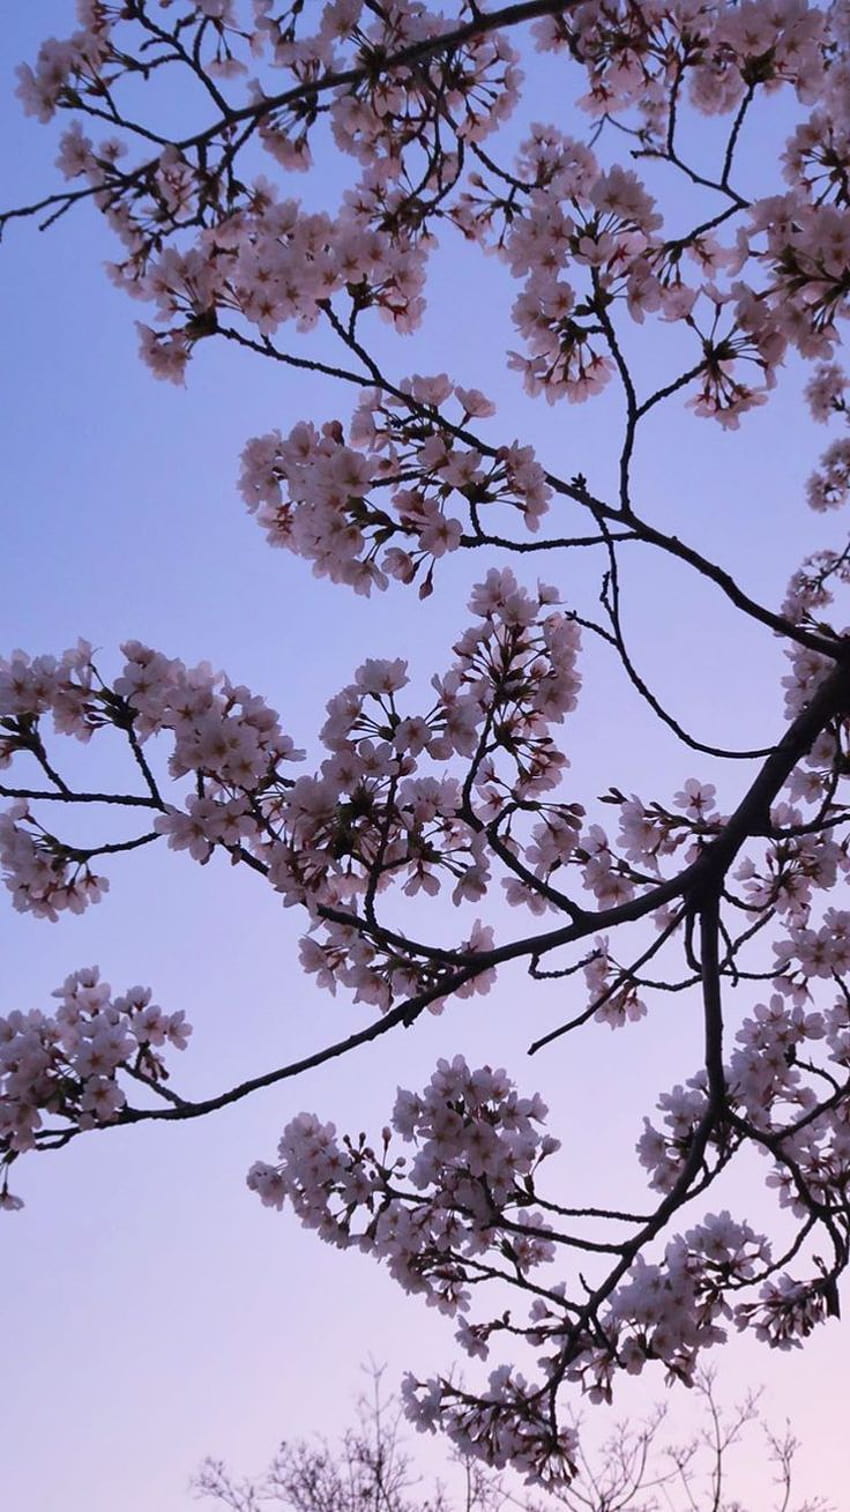 A branch of a tree with pink flowers against a blue sky - Cherry blossom